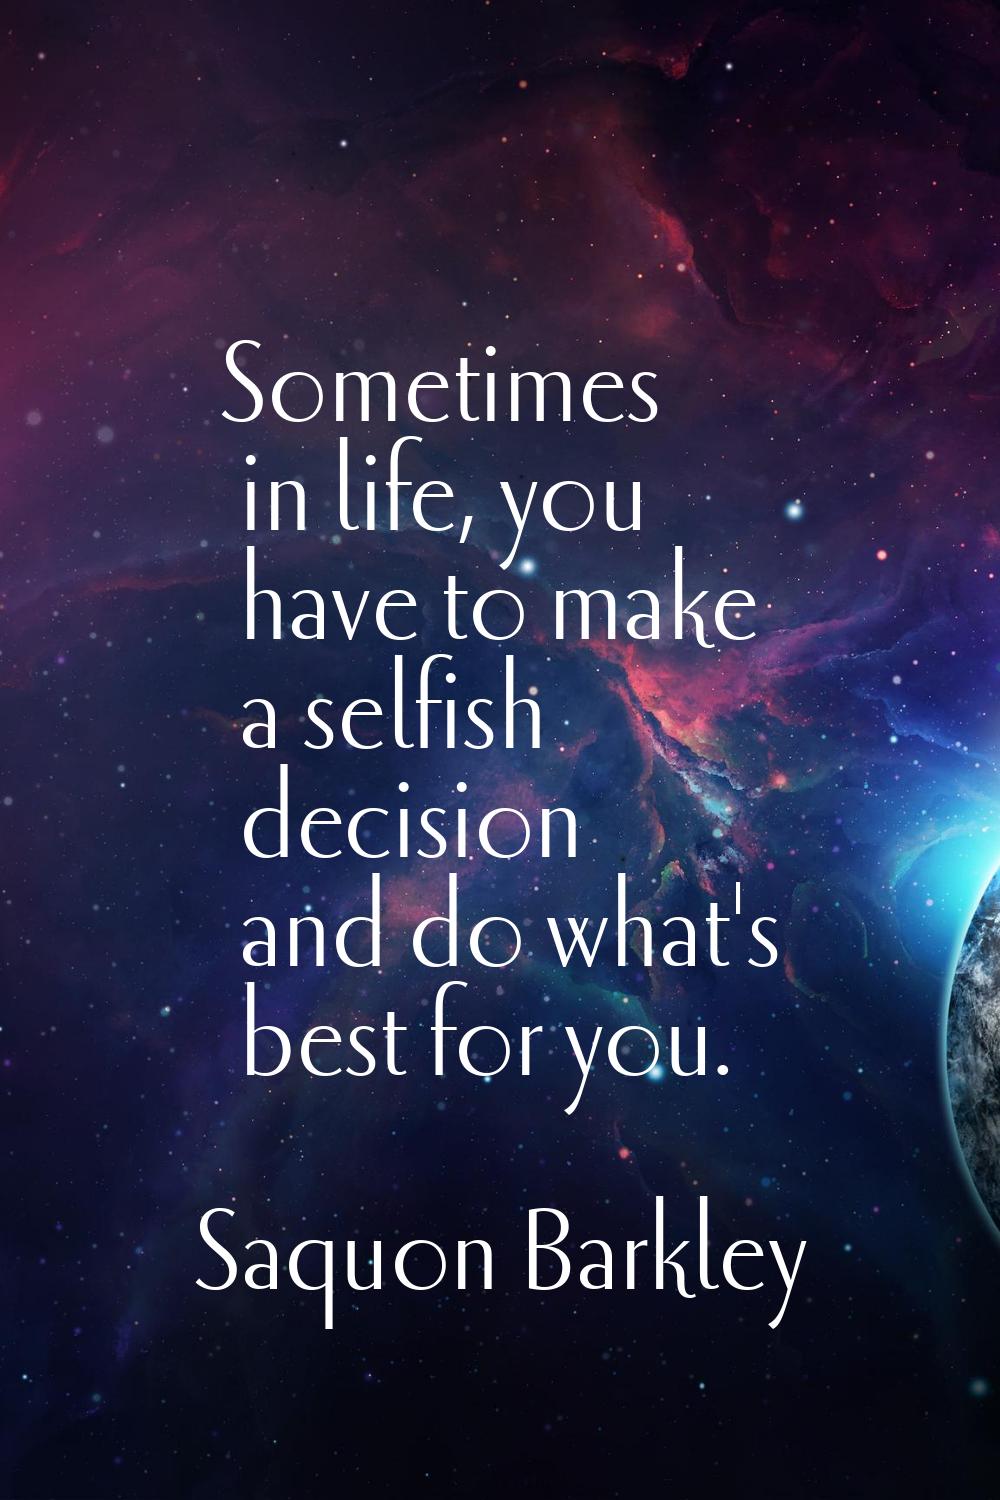 Sometimes in life, you have to make a selfish decision and do what's best for you.